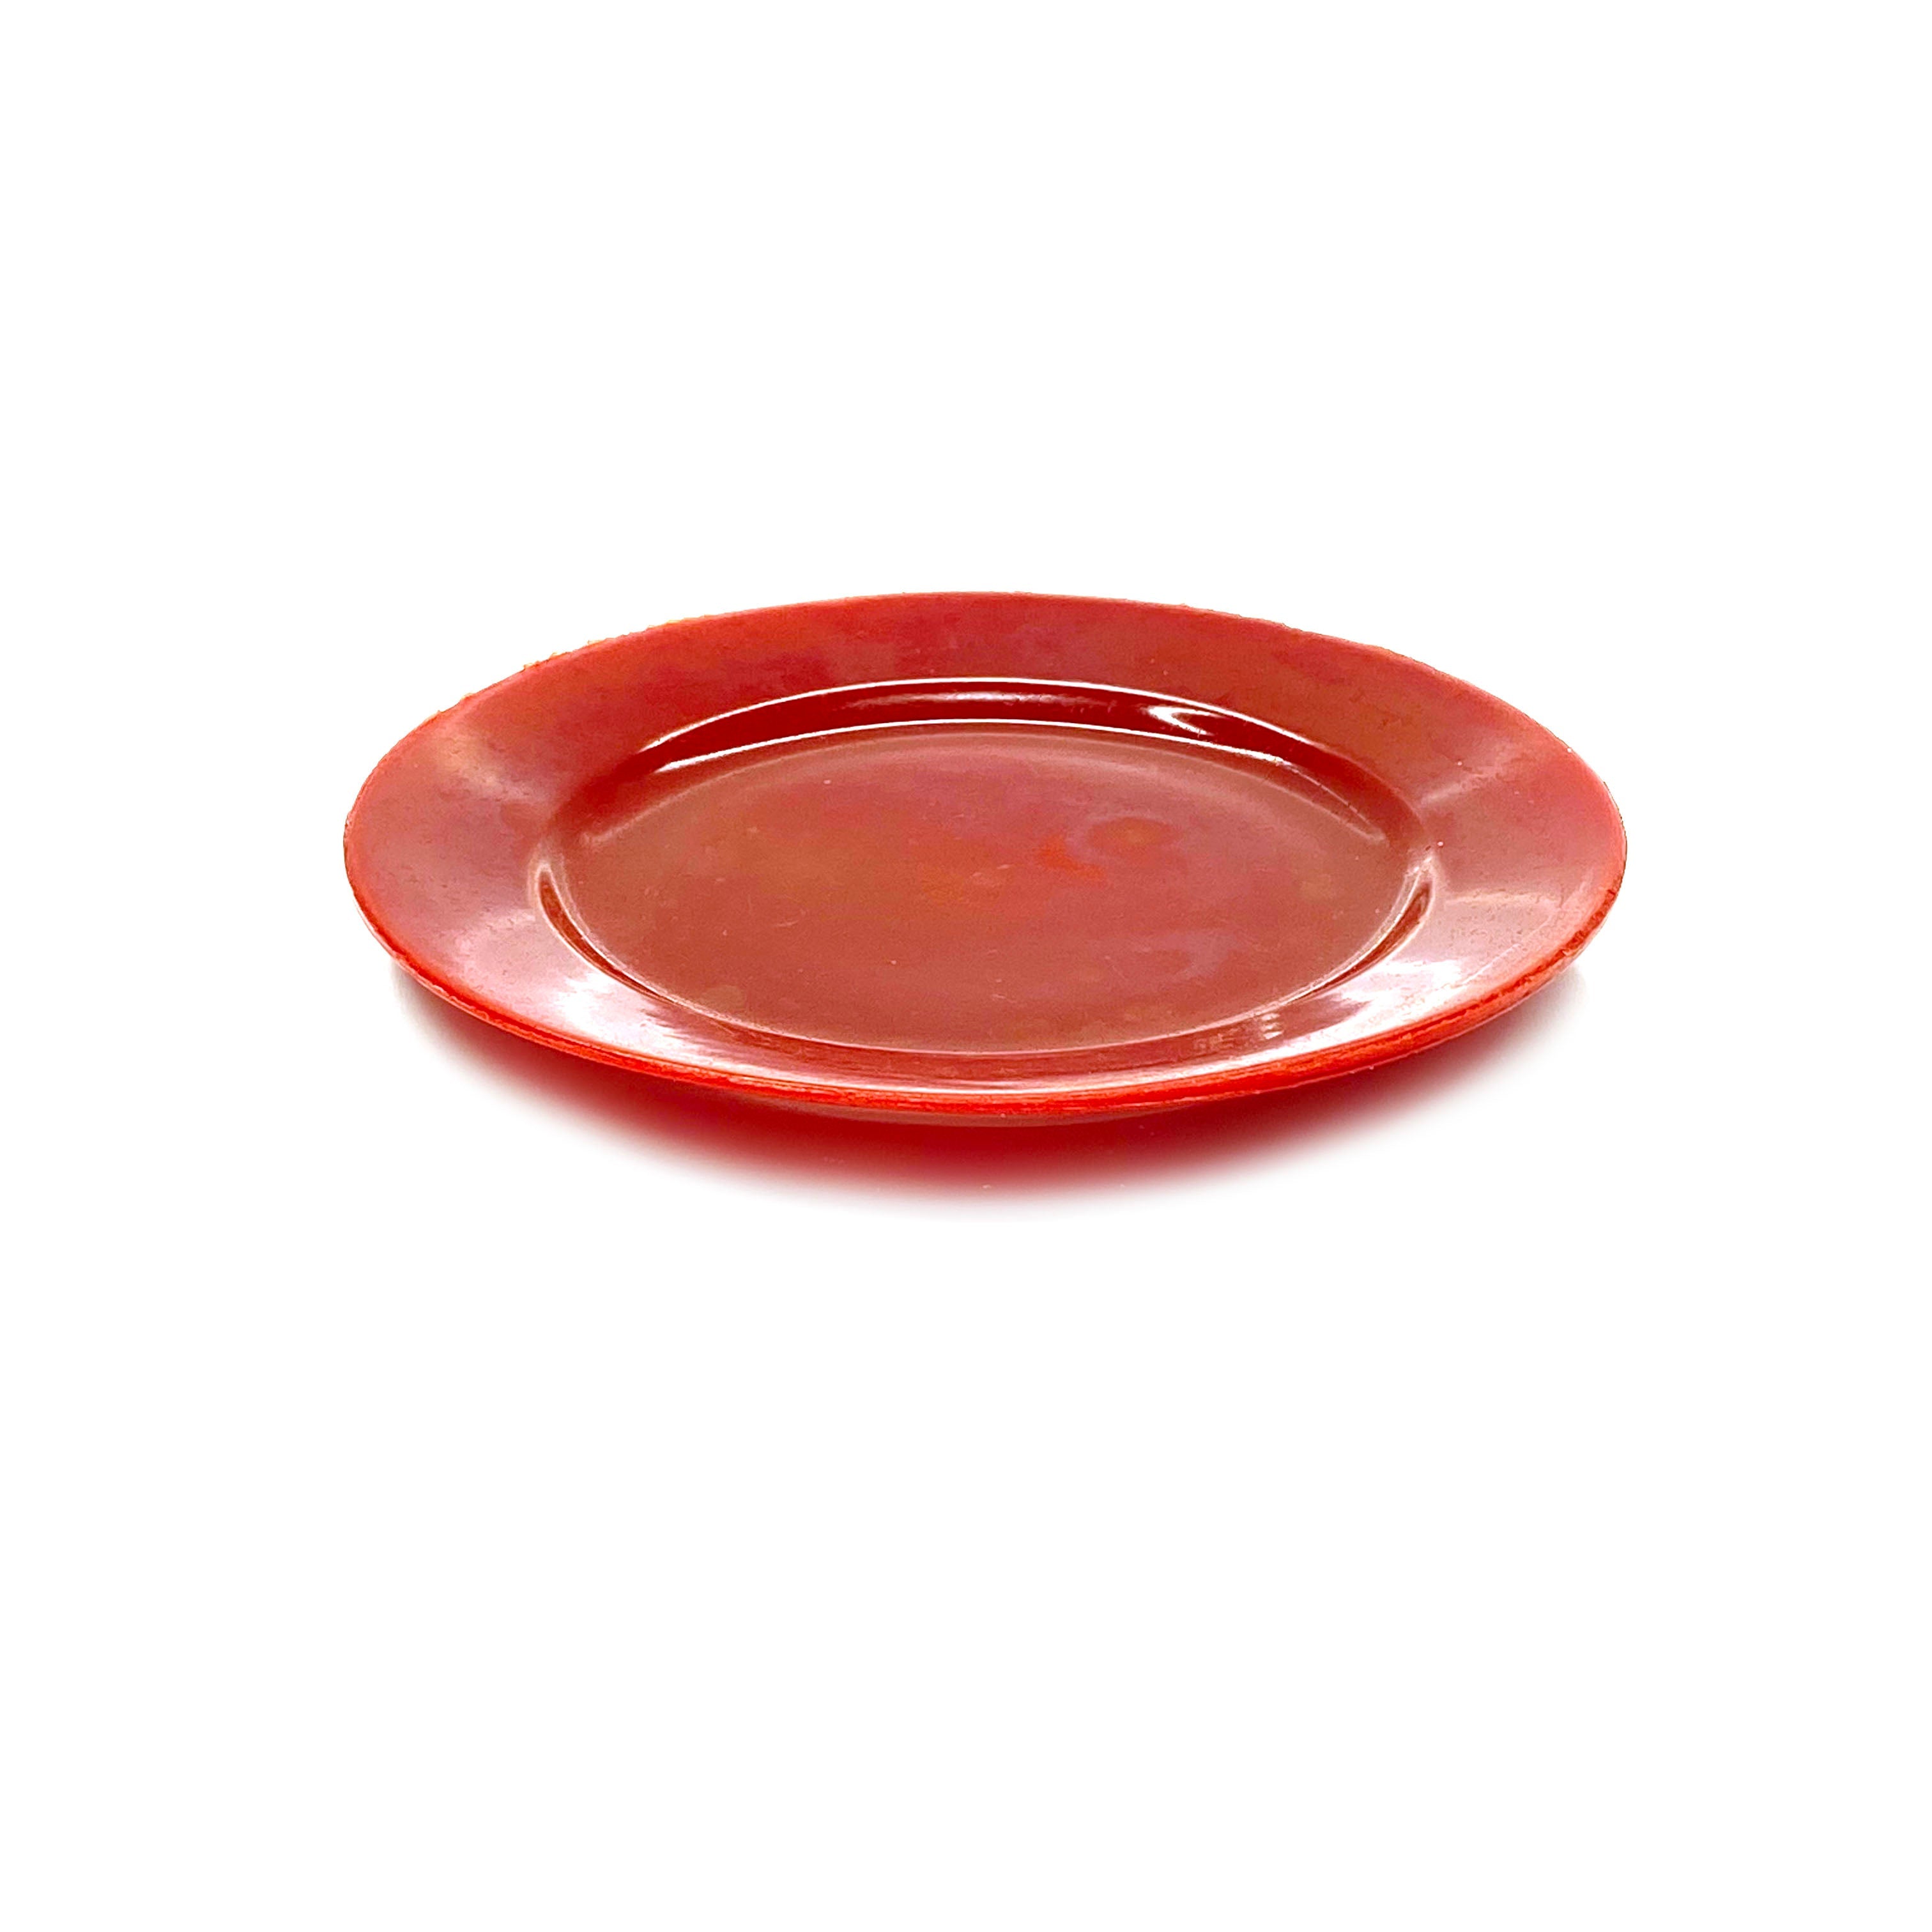 SMASHProps Breakaway Large Dinner Plate - RED opaque - Red,Opaque